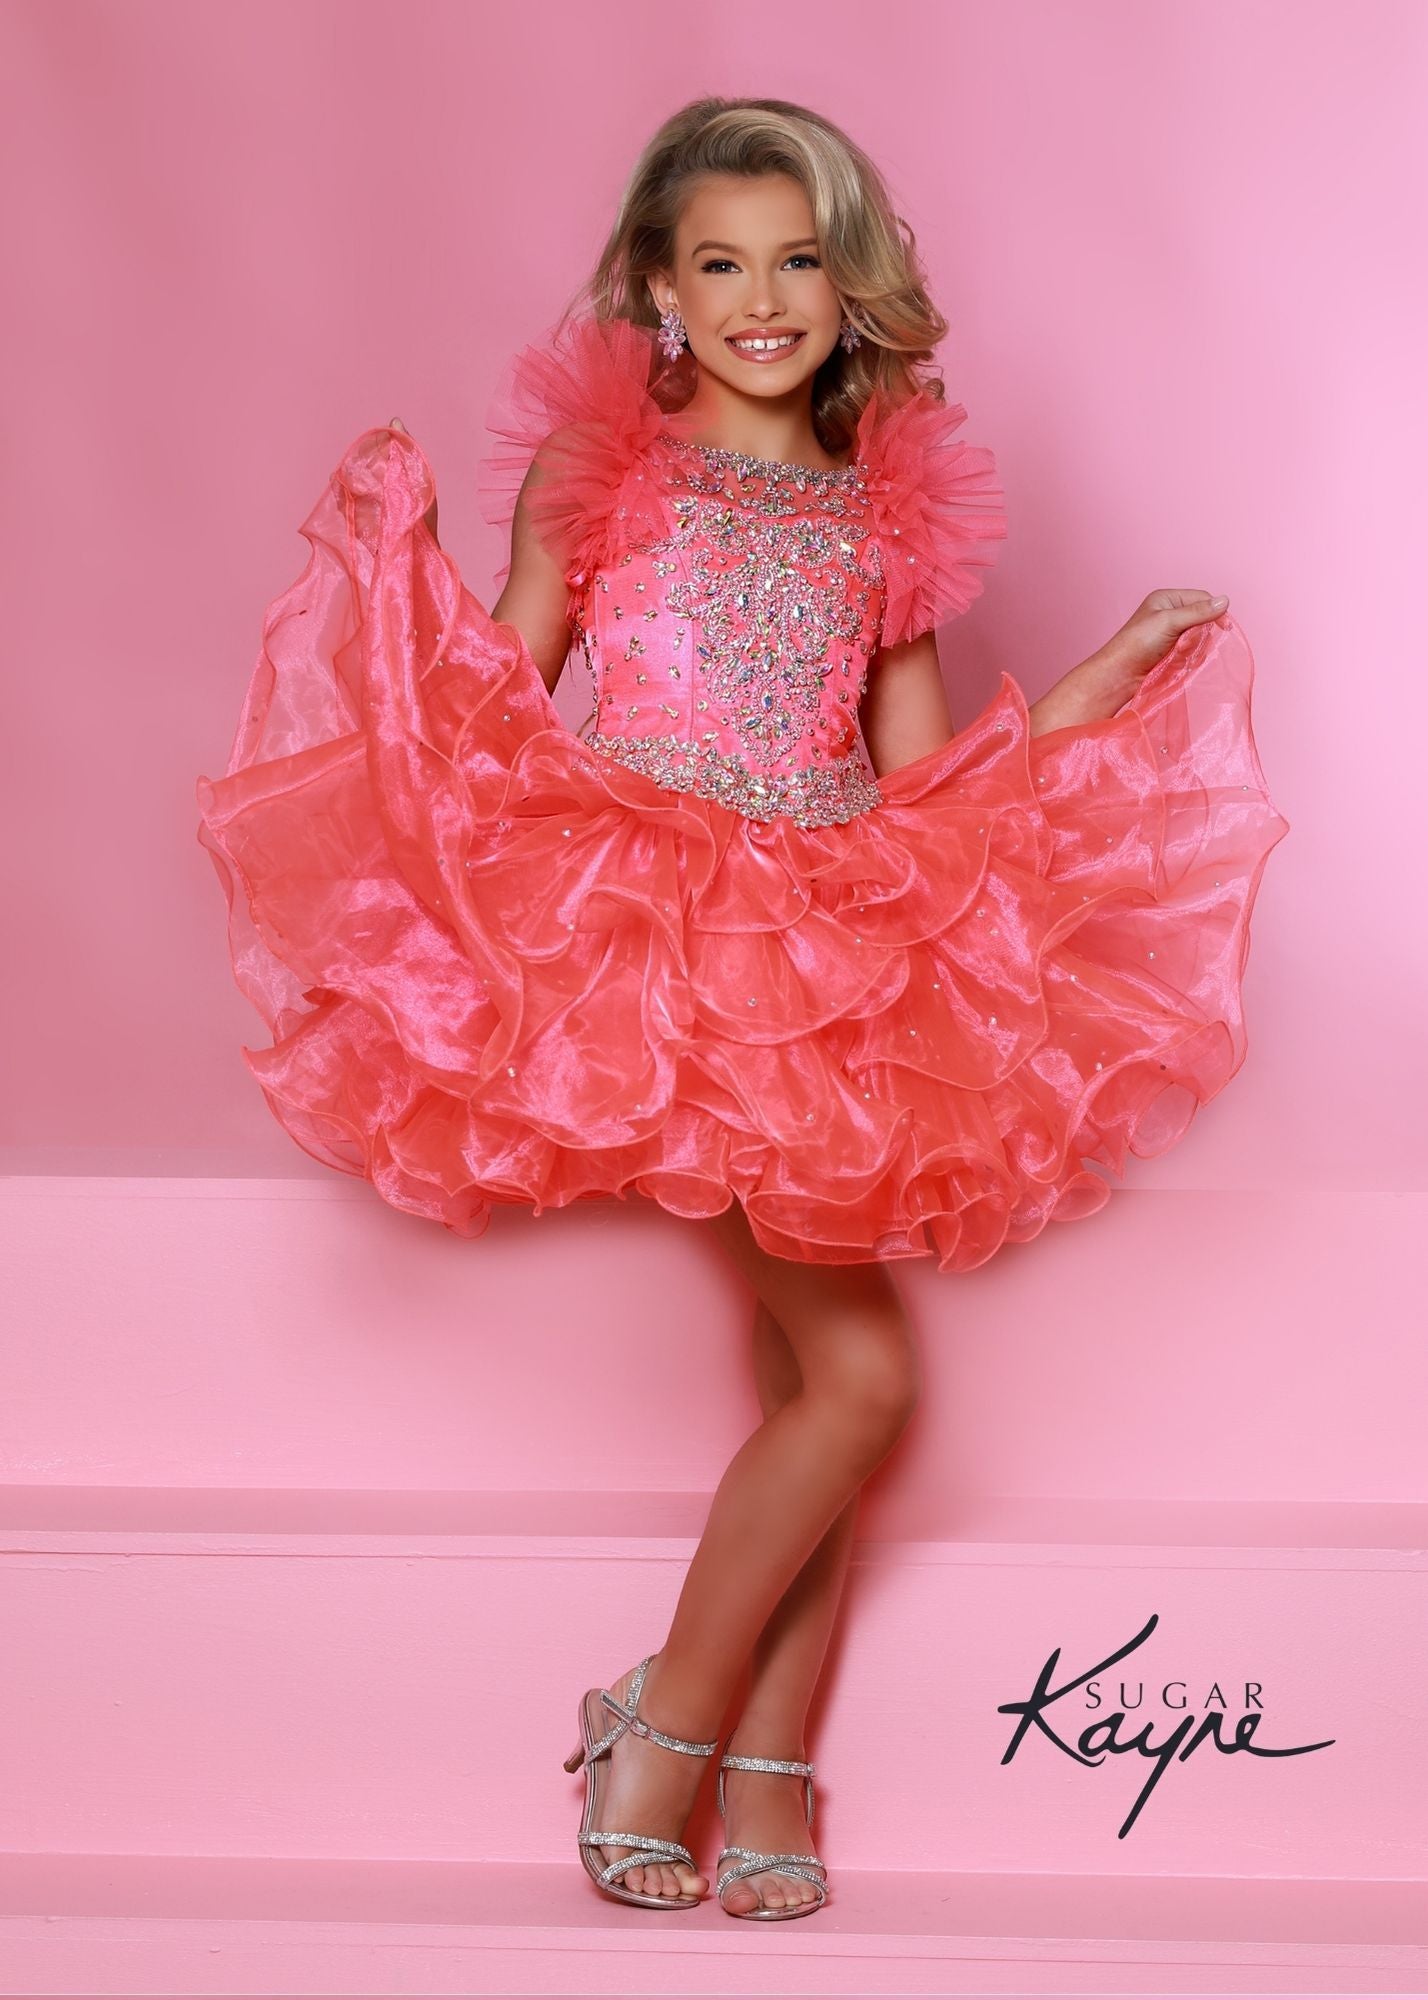 Sugar Kayne C211 Short Ruffle Cupcake Pageant Dress Crystal High Neck Girls Gown  Sizes: 0M, 6M, 12M, 18M, 24M, 2T, 3T, 4T, 5T, 6T  Colors: Hot Coral White